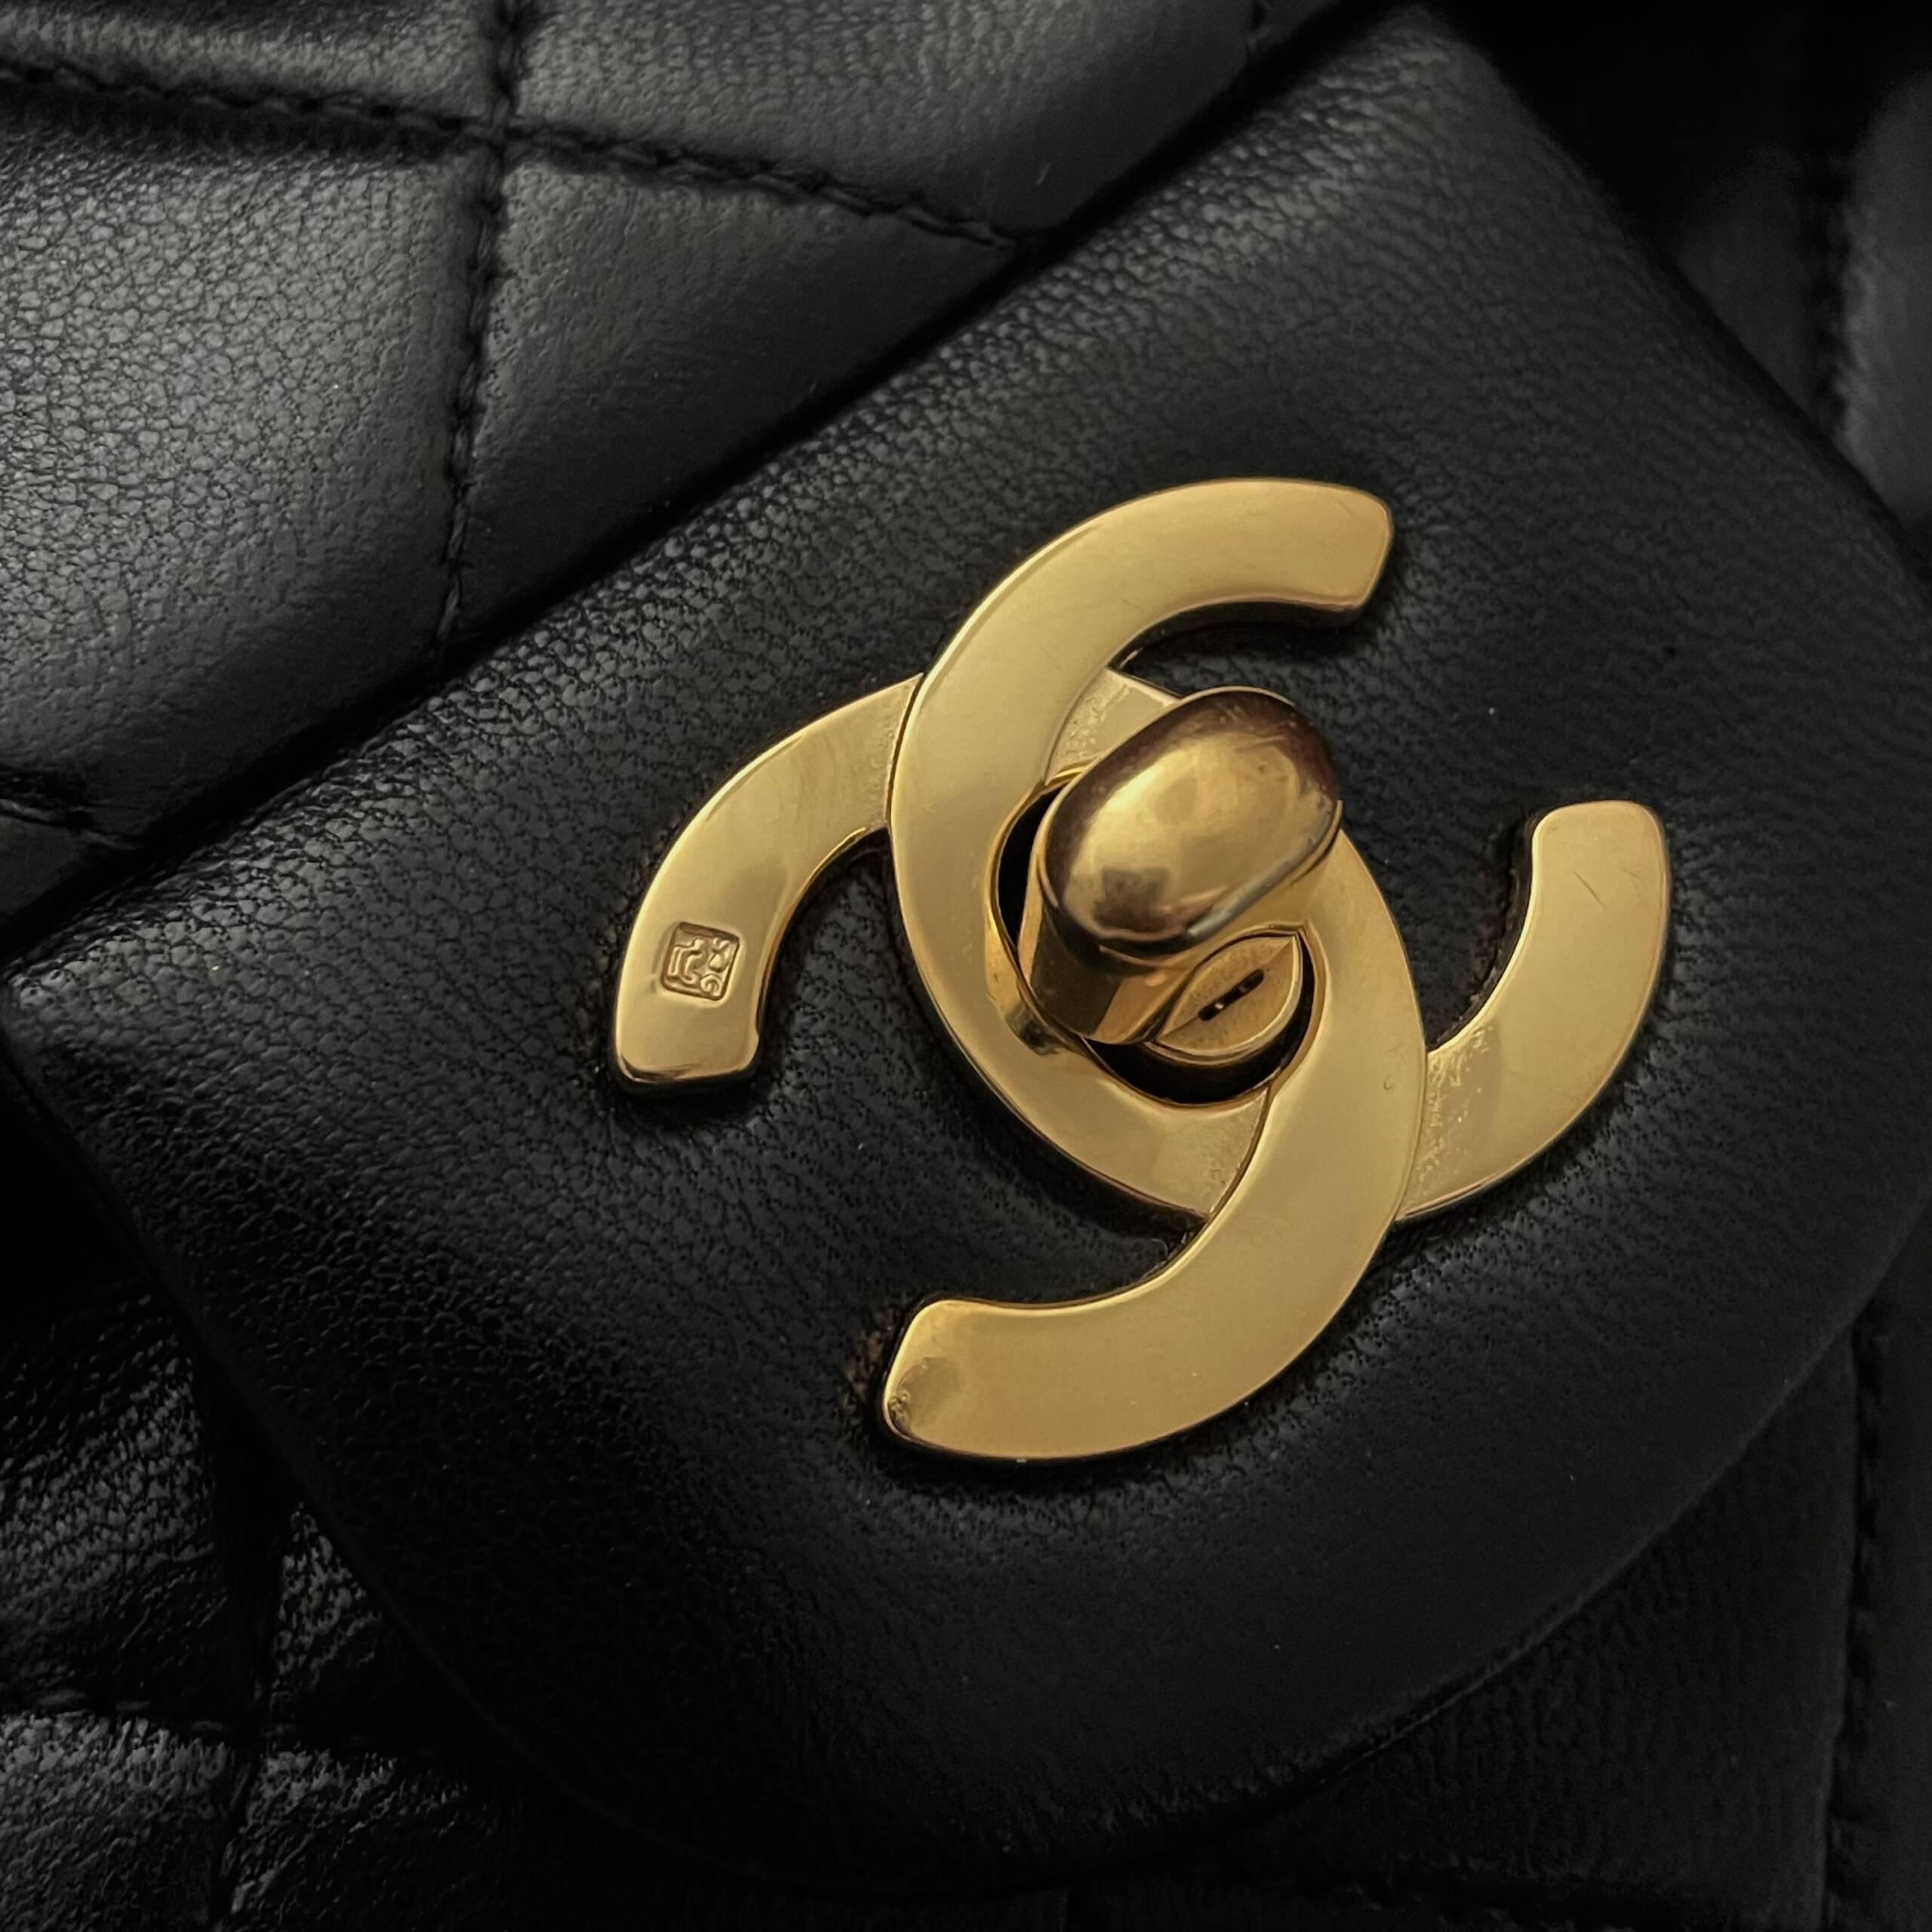 lambskin quilted chanel bag black